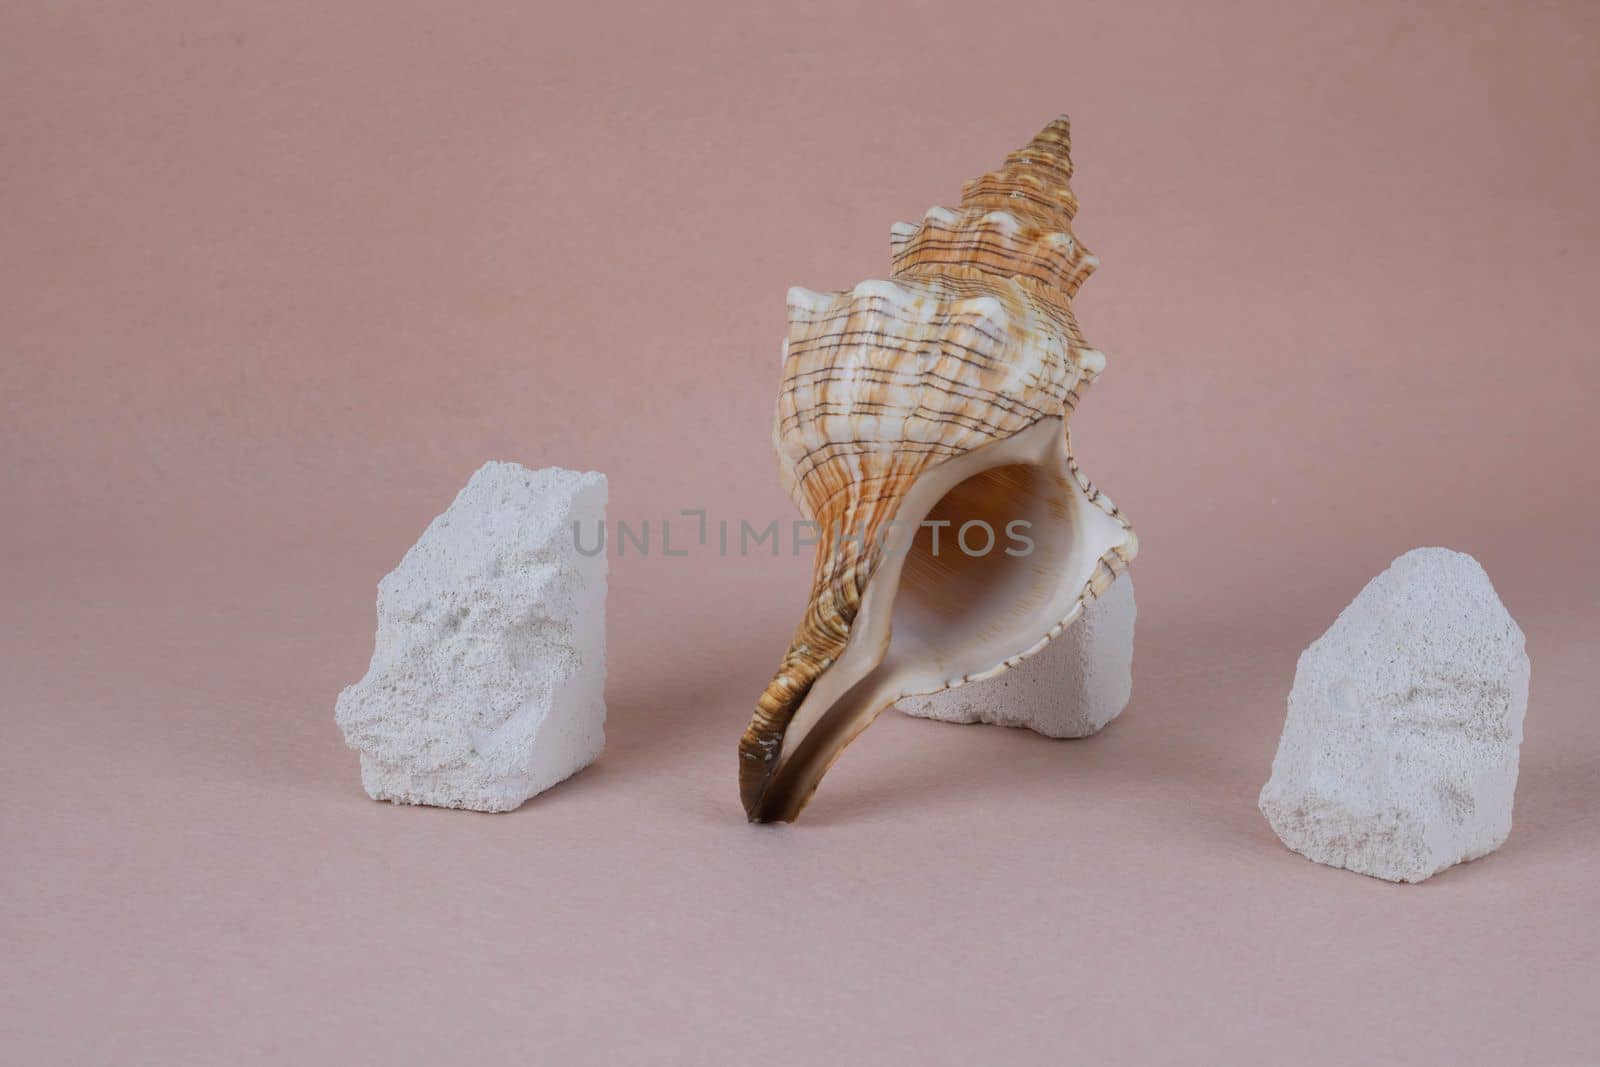 A large shell and white fragments of stones on a pink background.